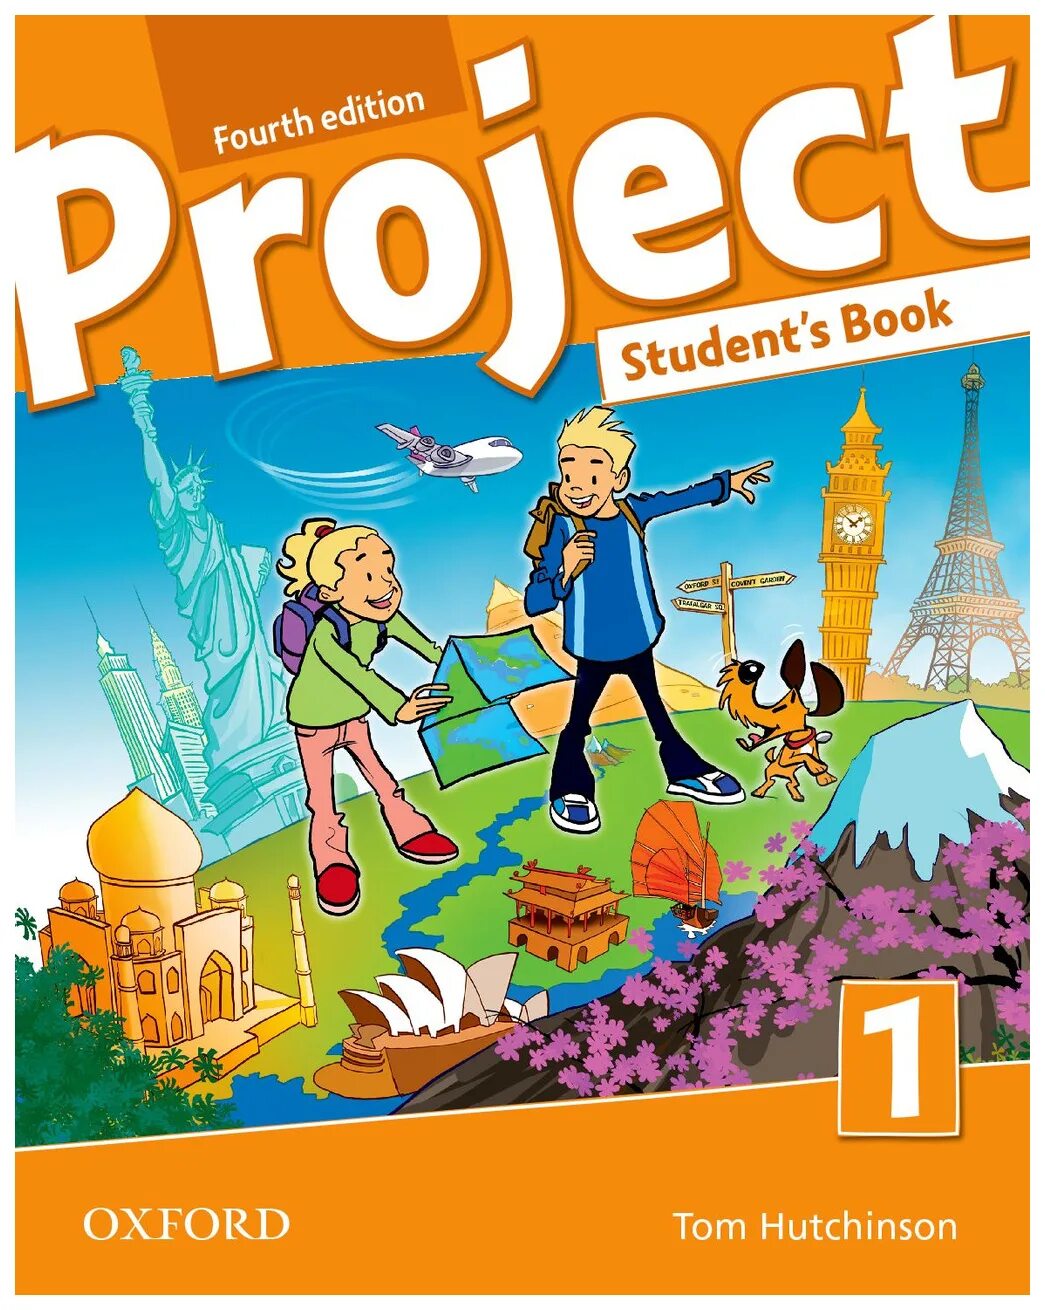 C1 student s book. Project 1 fourth Edition students book. Project 1 4th Edition. Project student book4 fourth Edition Workbook book. Рабочая тетрадь Project 1 Oxford Tom Hutchinson.